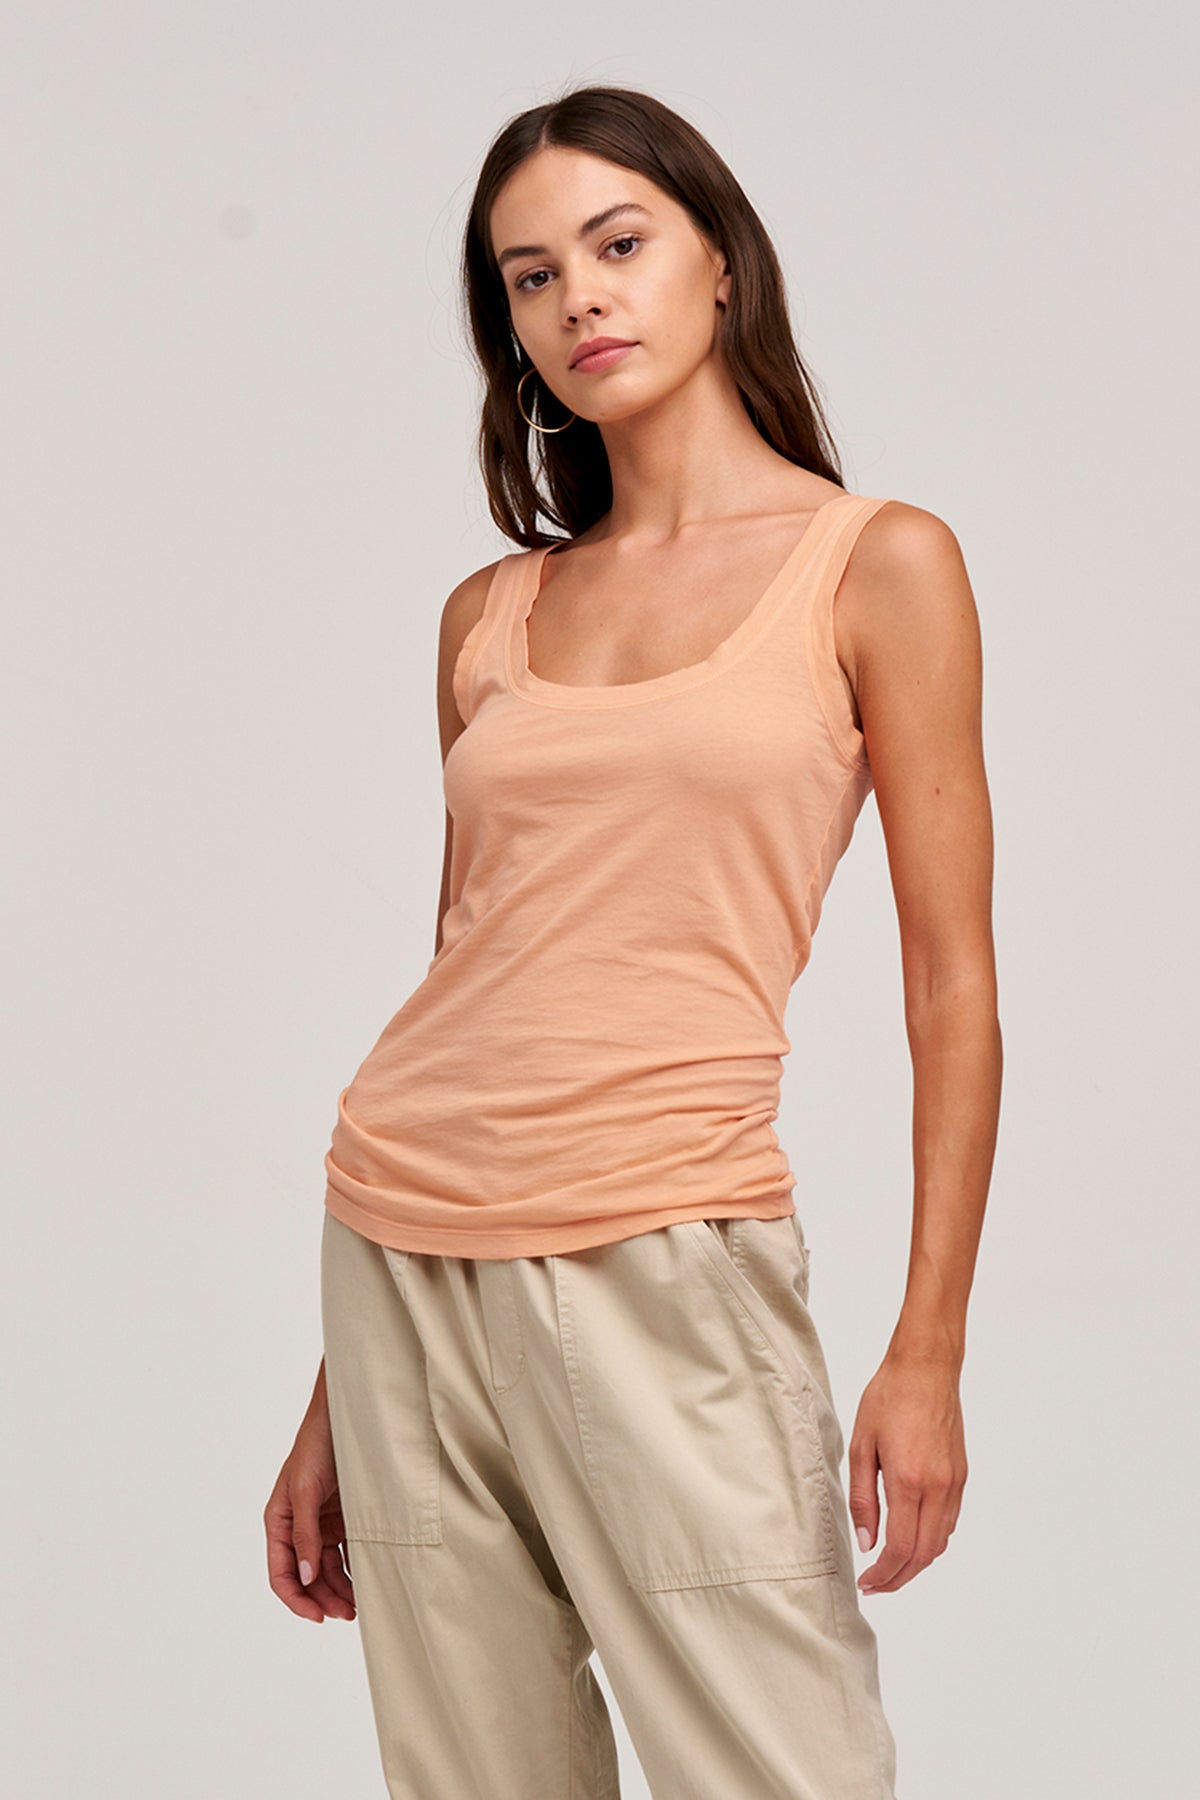 The model is wearing a MOSSY GAUZY WHISPER FITTED TANK by Velvet by Graham & Spencer and tan pants.-26631183990977